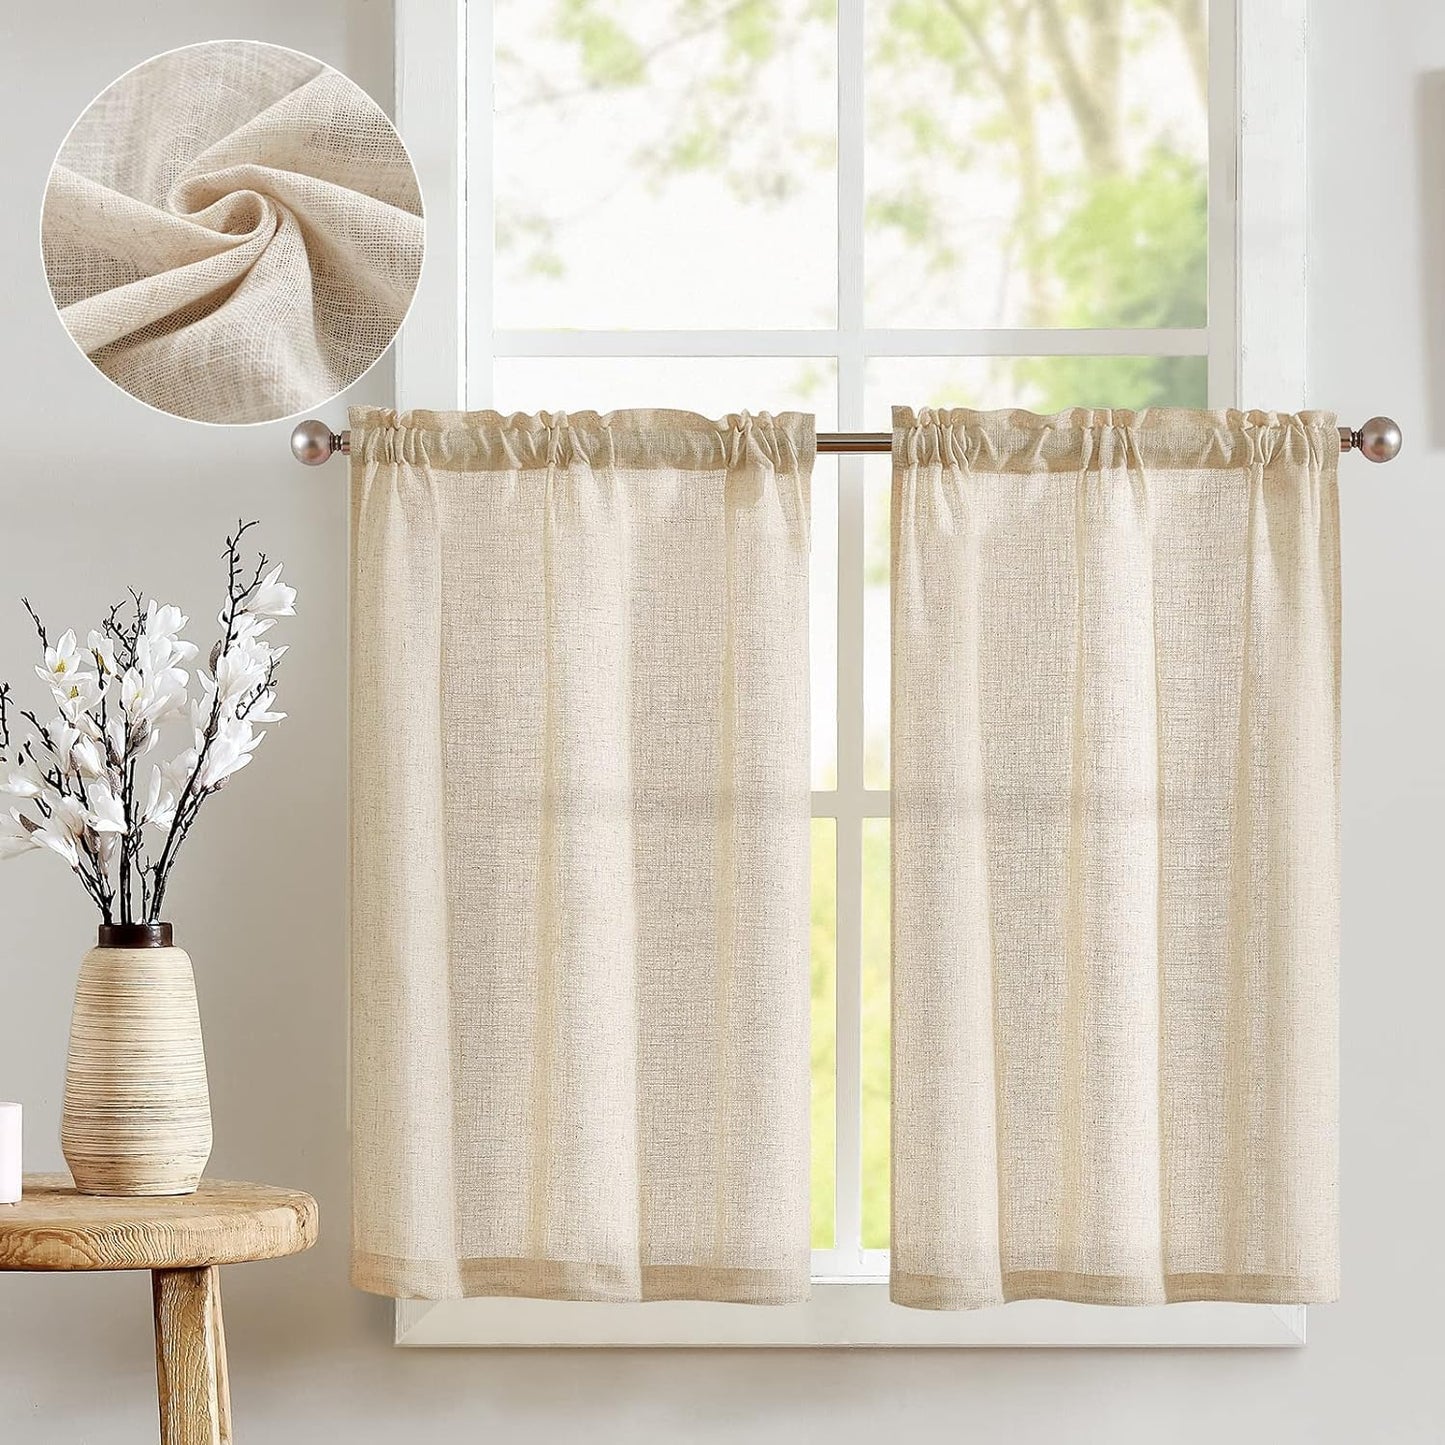 Jinchan Kitchen Curtains Striped Tier Curtains Ticking Stripe Linen Curtains Pinstripe Cafe Curtains 24 Inch Length for Living Room Bathroom Farmhouse Curtains Rod Pocket 2 Panels Black on Beige  CKNY HOME FASHION Thick Linen Crude W26 X L24 